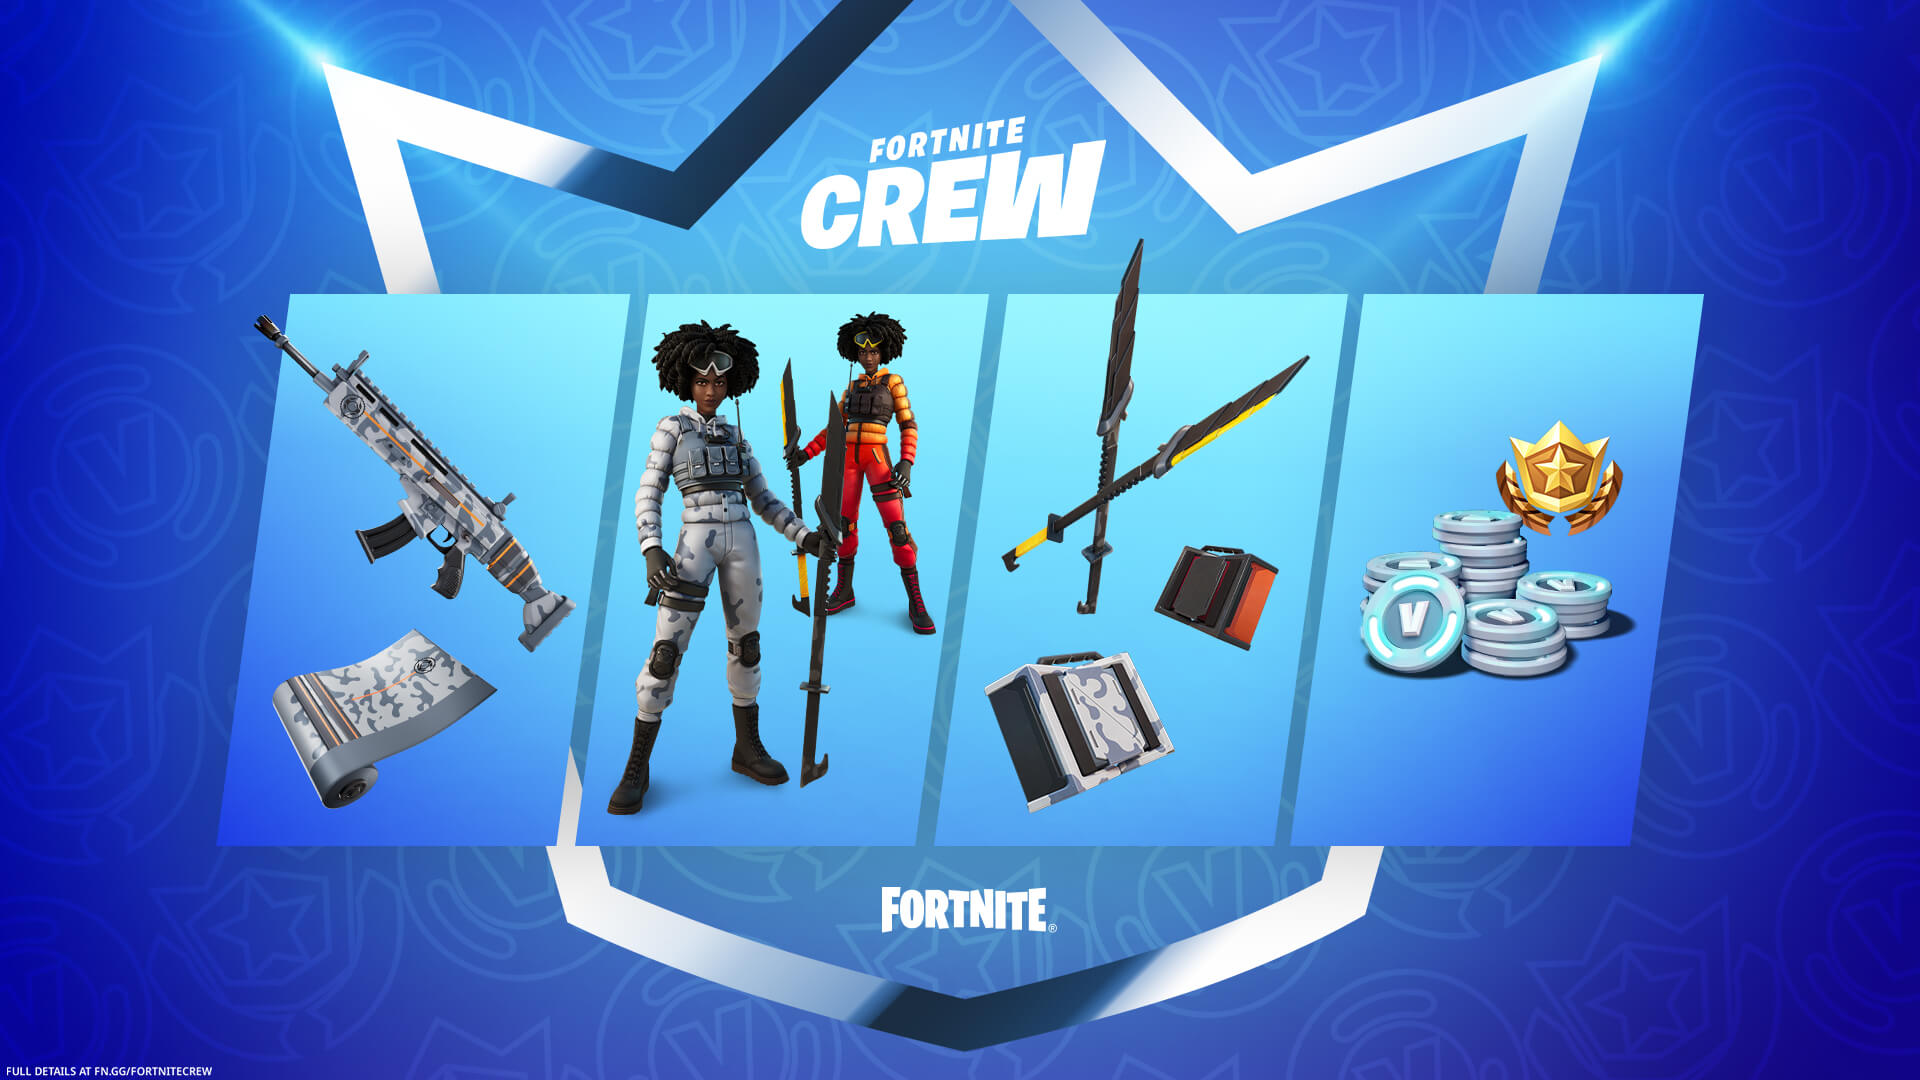 Fortnite officially reveals the January 2022 Crew Pack: Snow Stealth Slone